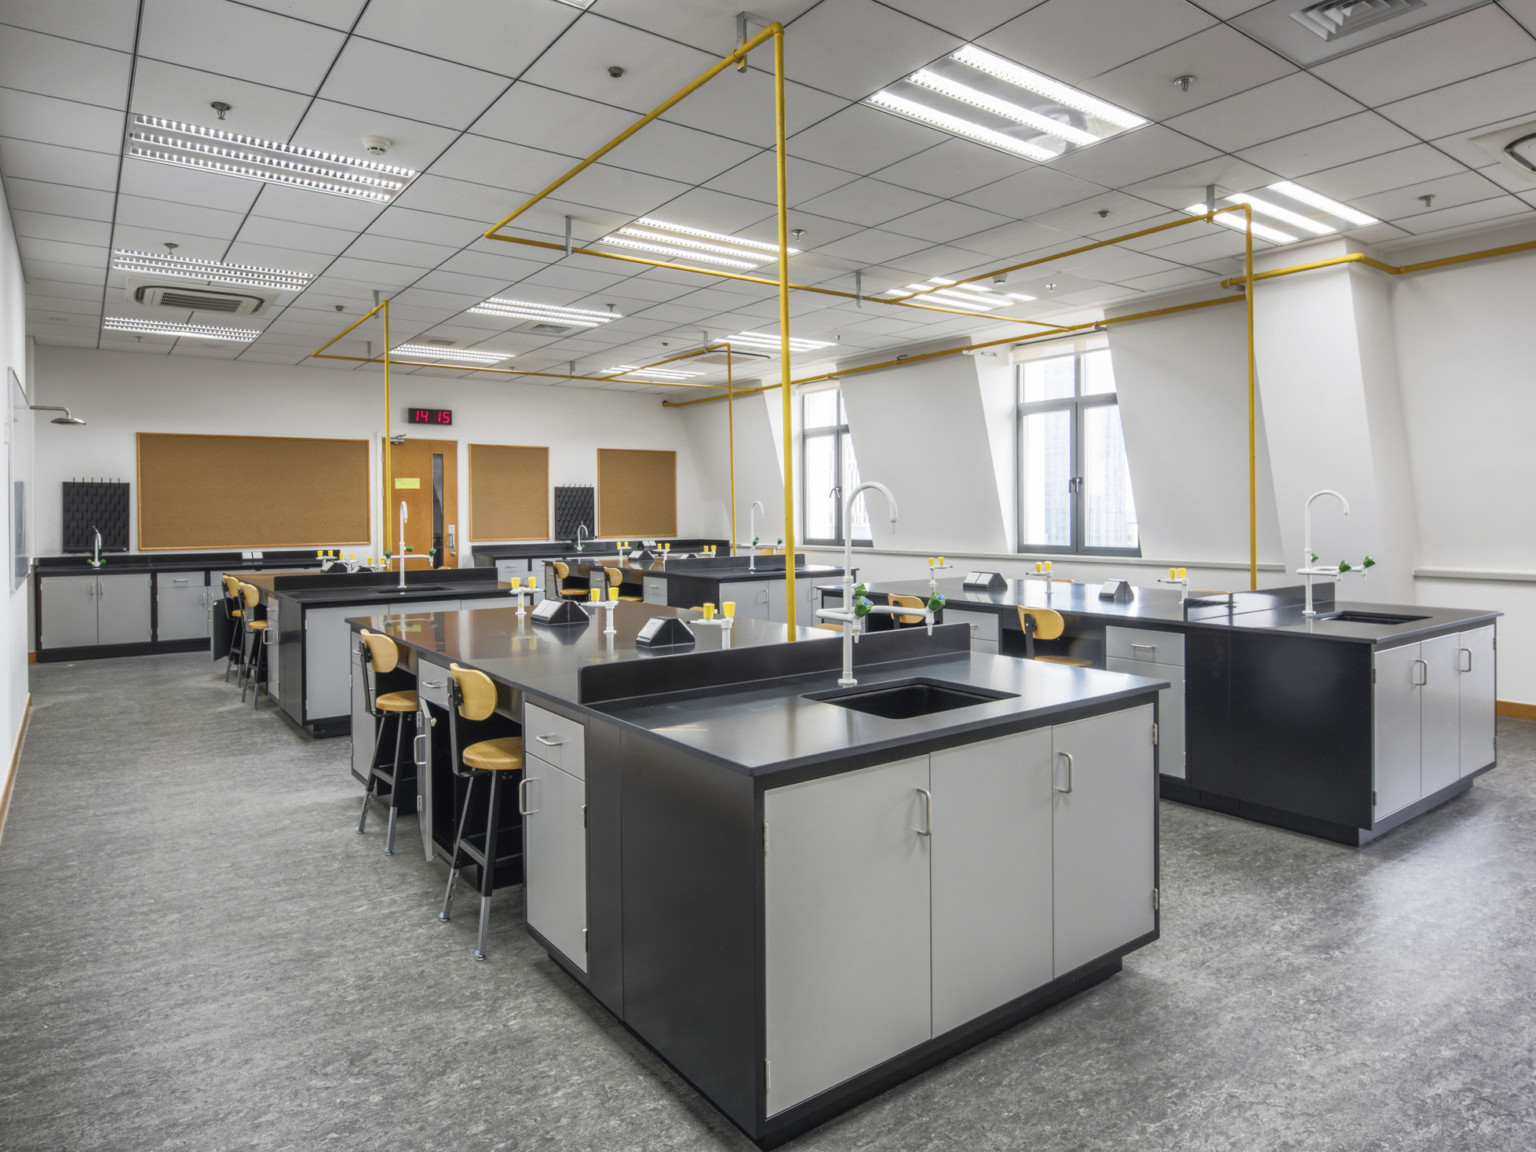 Science lab with partitioned sinks at ends of lab tables. Tables have black counters and grey drawers divided by yellow chair